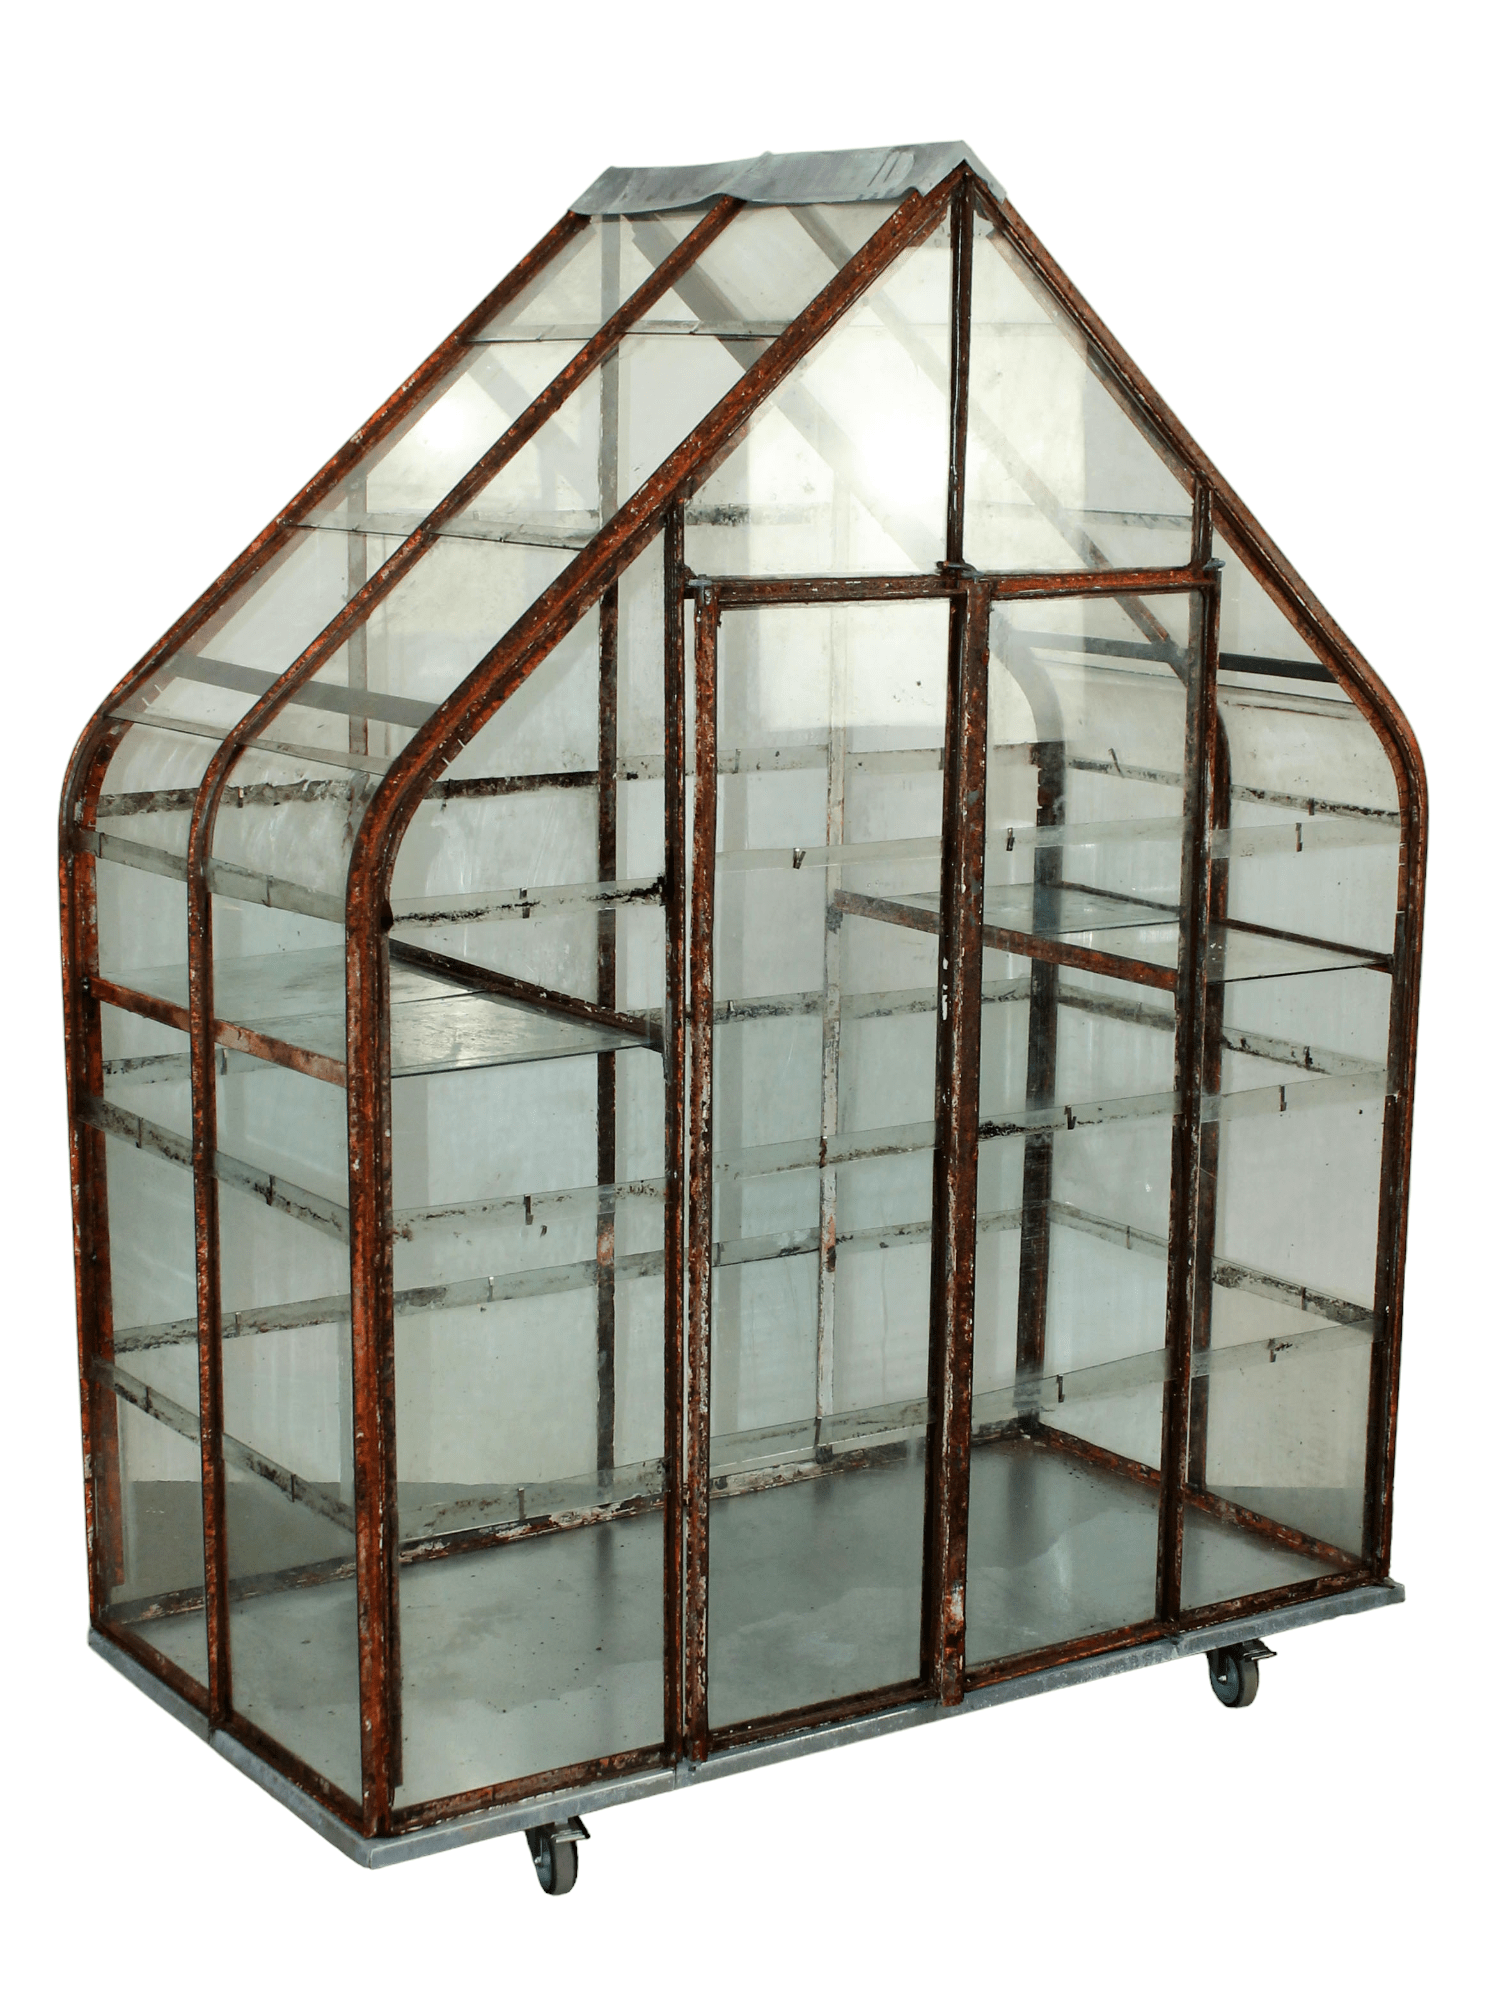 French iron and glass greenhouse